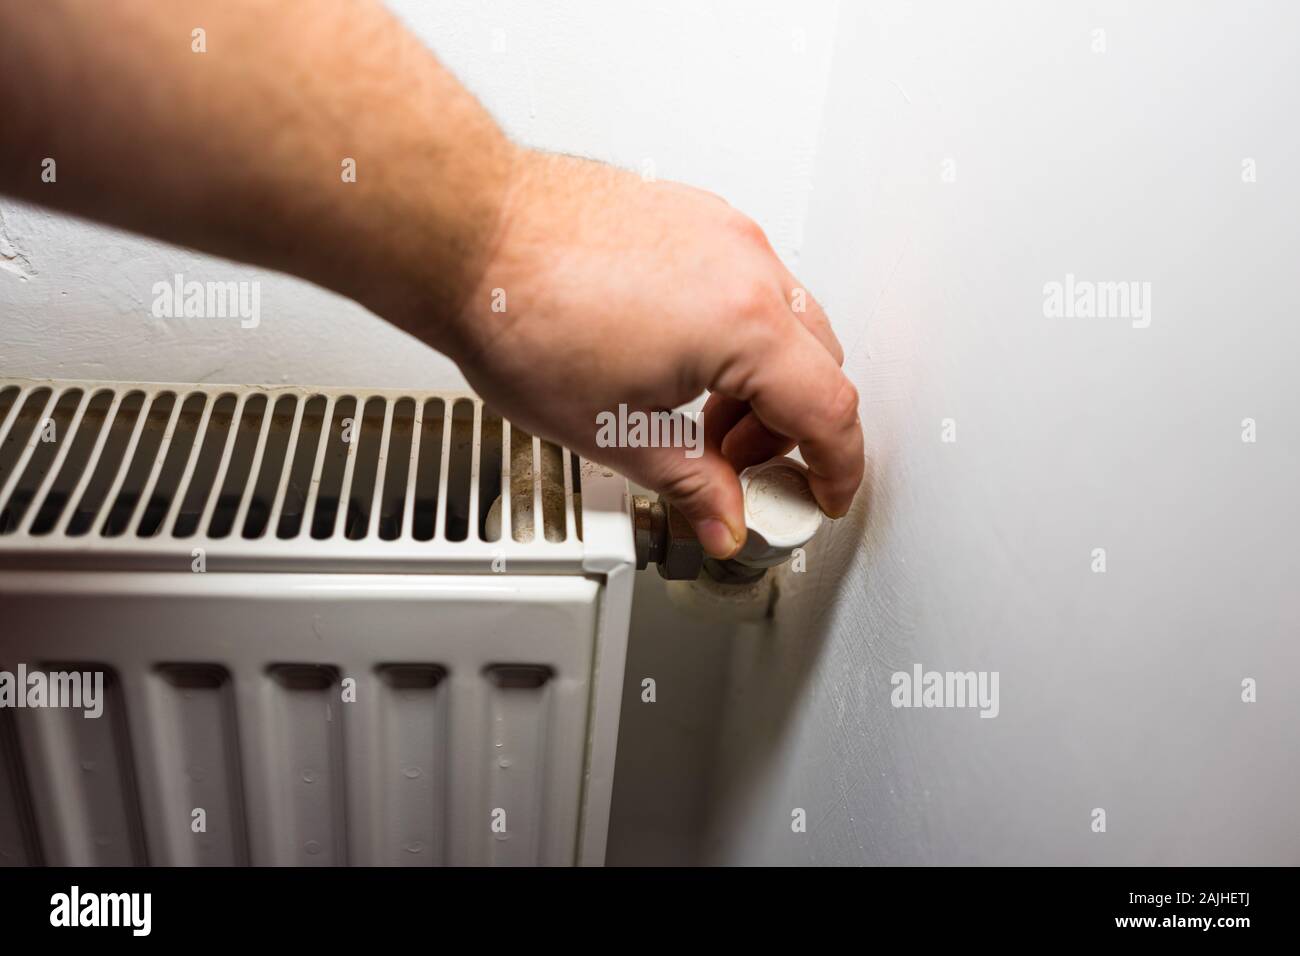 Hand adjusting thermostat valve of heating radiator in a room. Close up  heating radiator. Central heating concept, radiator heater Stock Photo -  Alamy